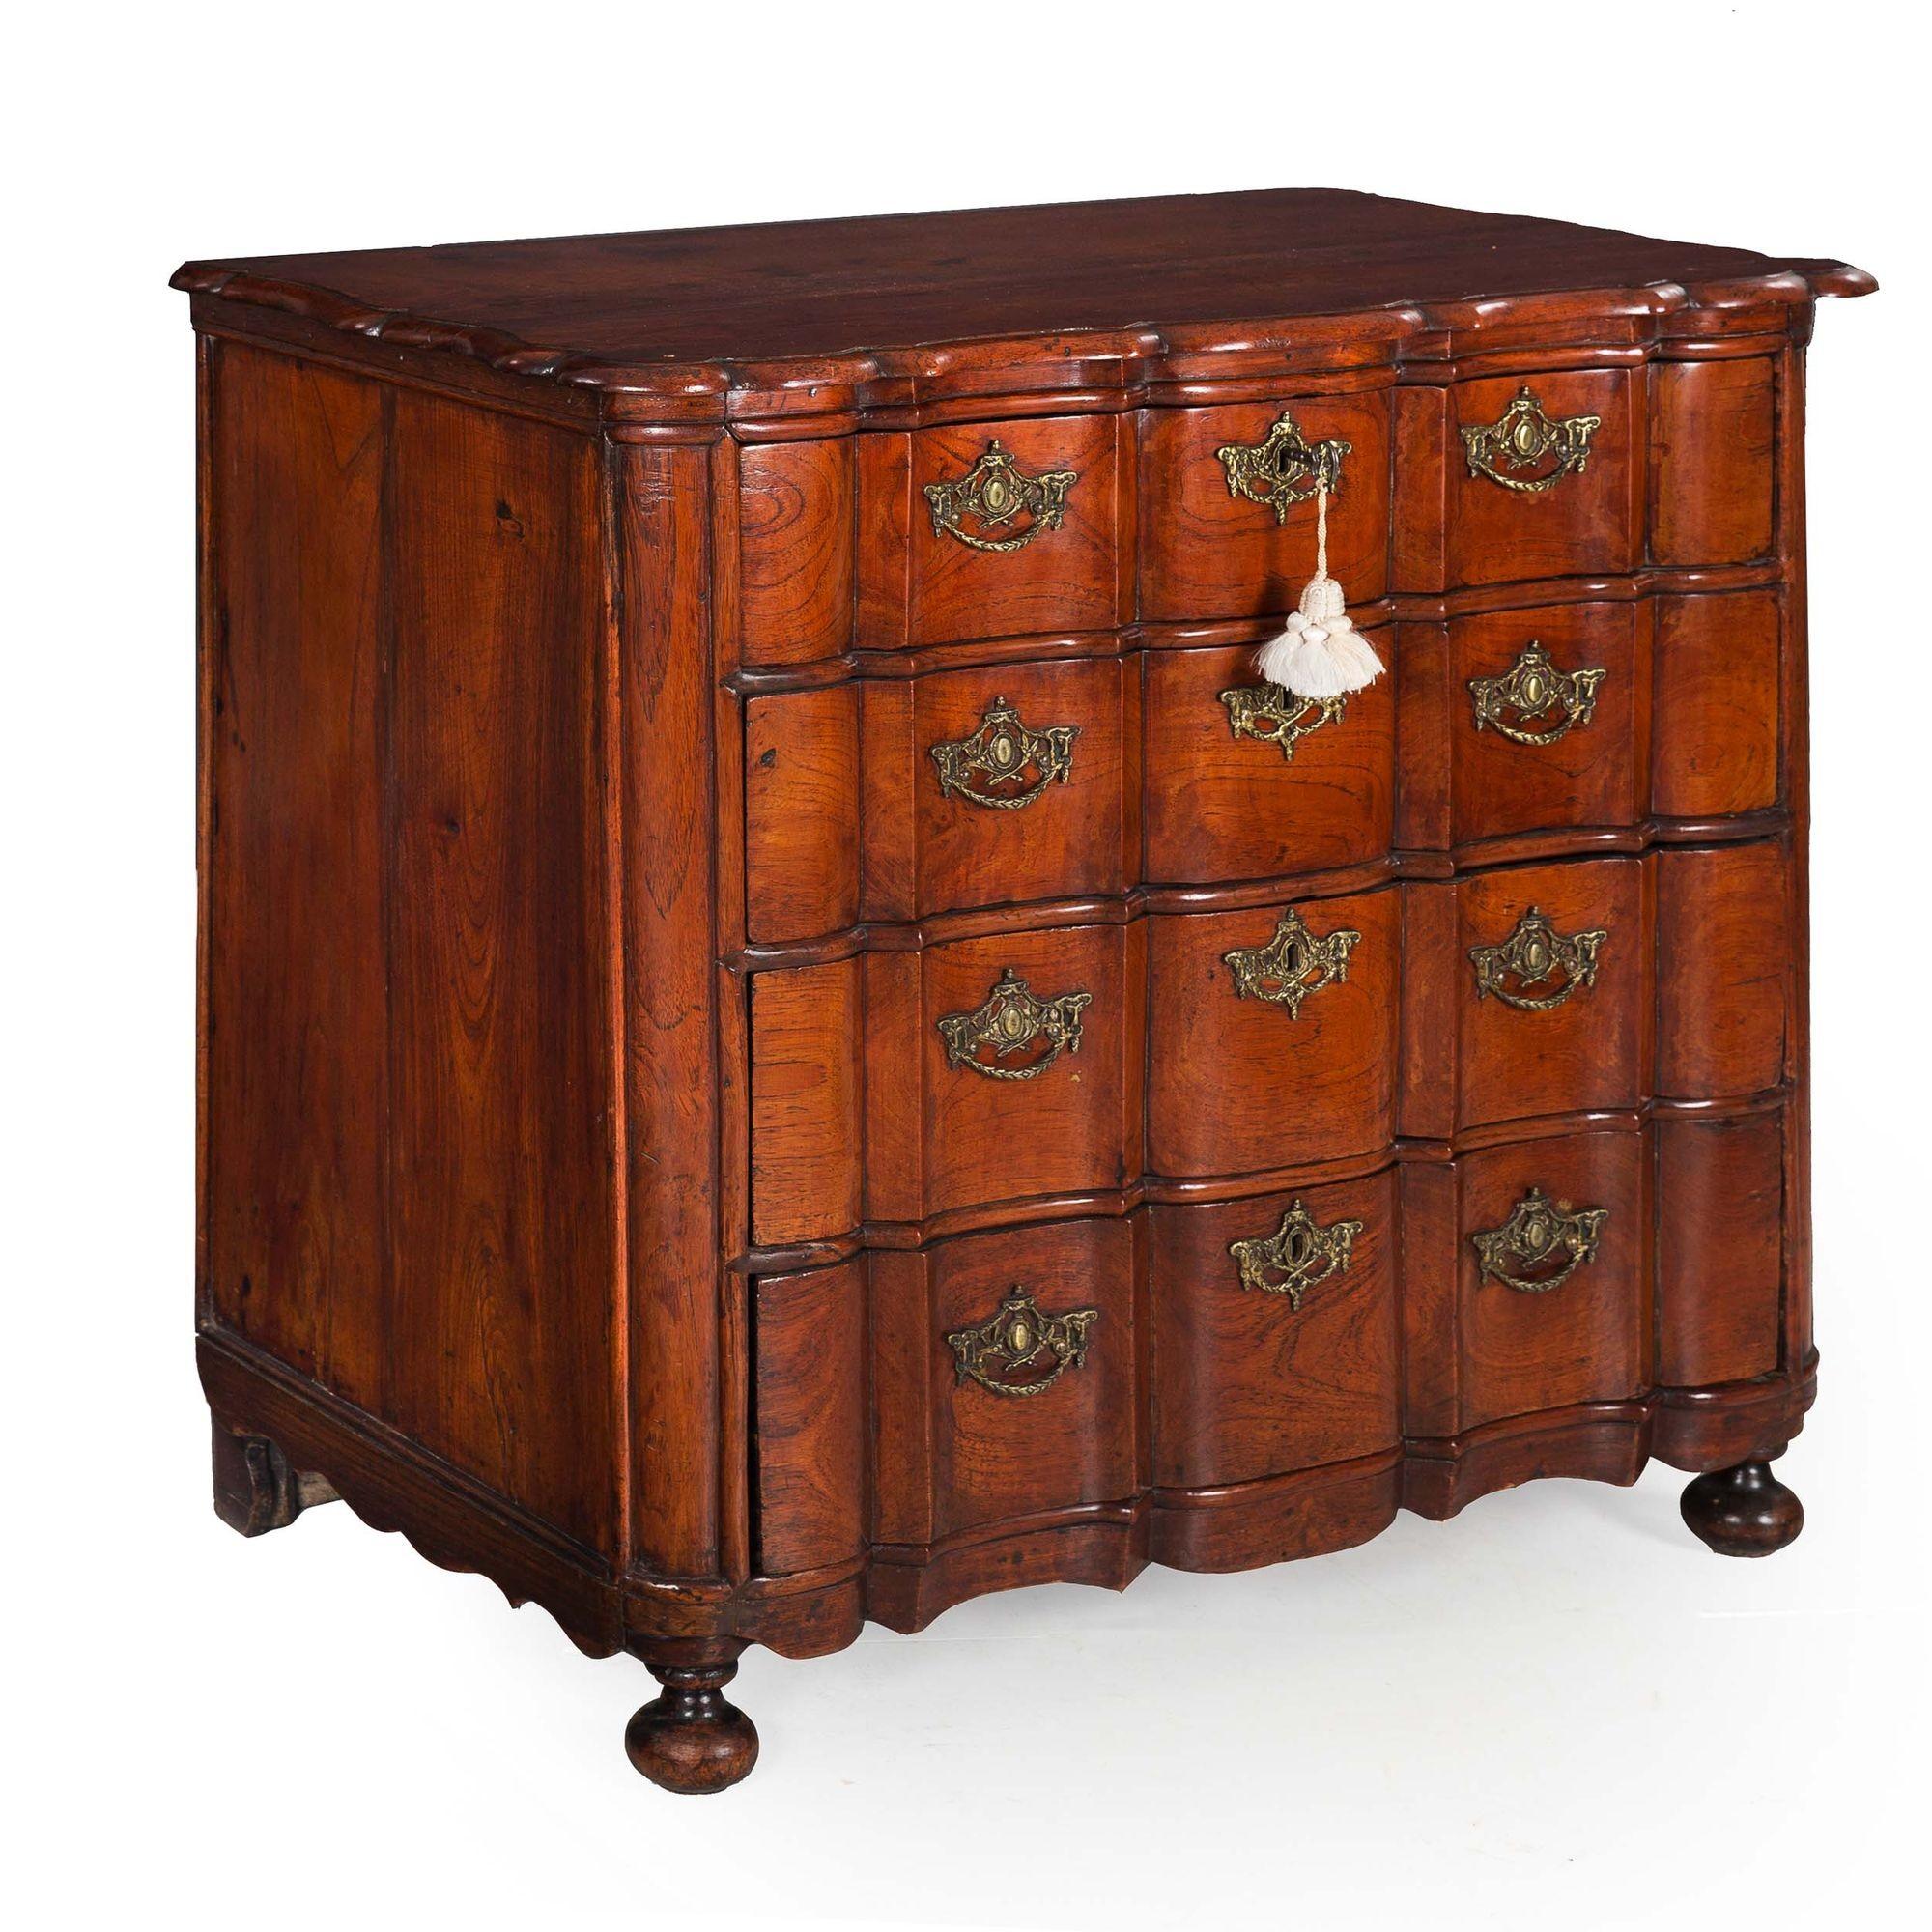 DUTCH BAROQUE REVIVAL CHEST OF DRAWERS
Circa 19th century
Item # 209PFT16A 

A very attractive Dutch chest of drawers in the Baroque taste, it is a product of the 19th century with early and probably original cast brasses. All surfaces have a